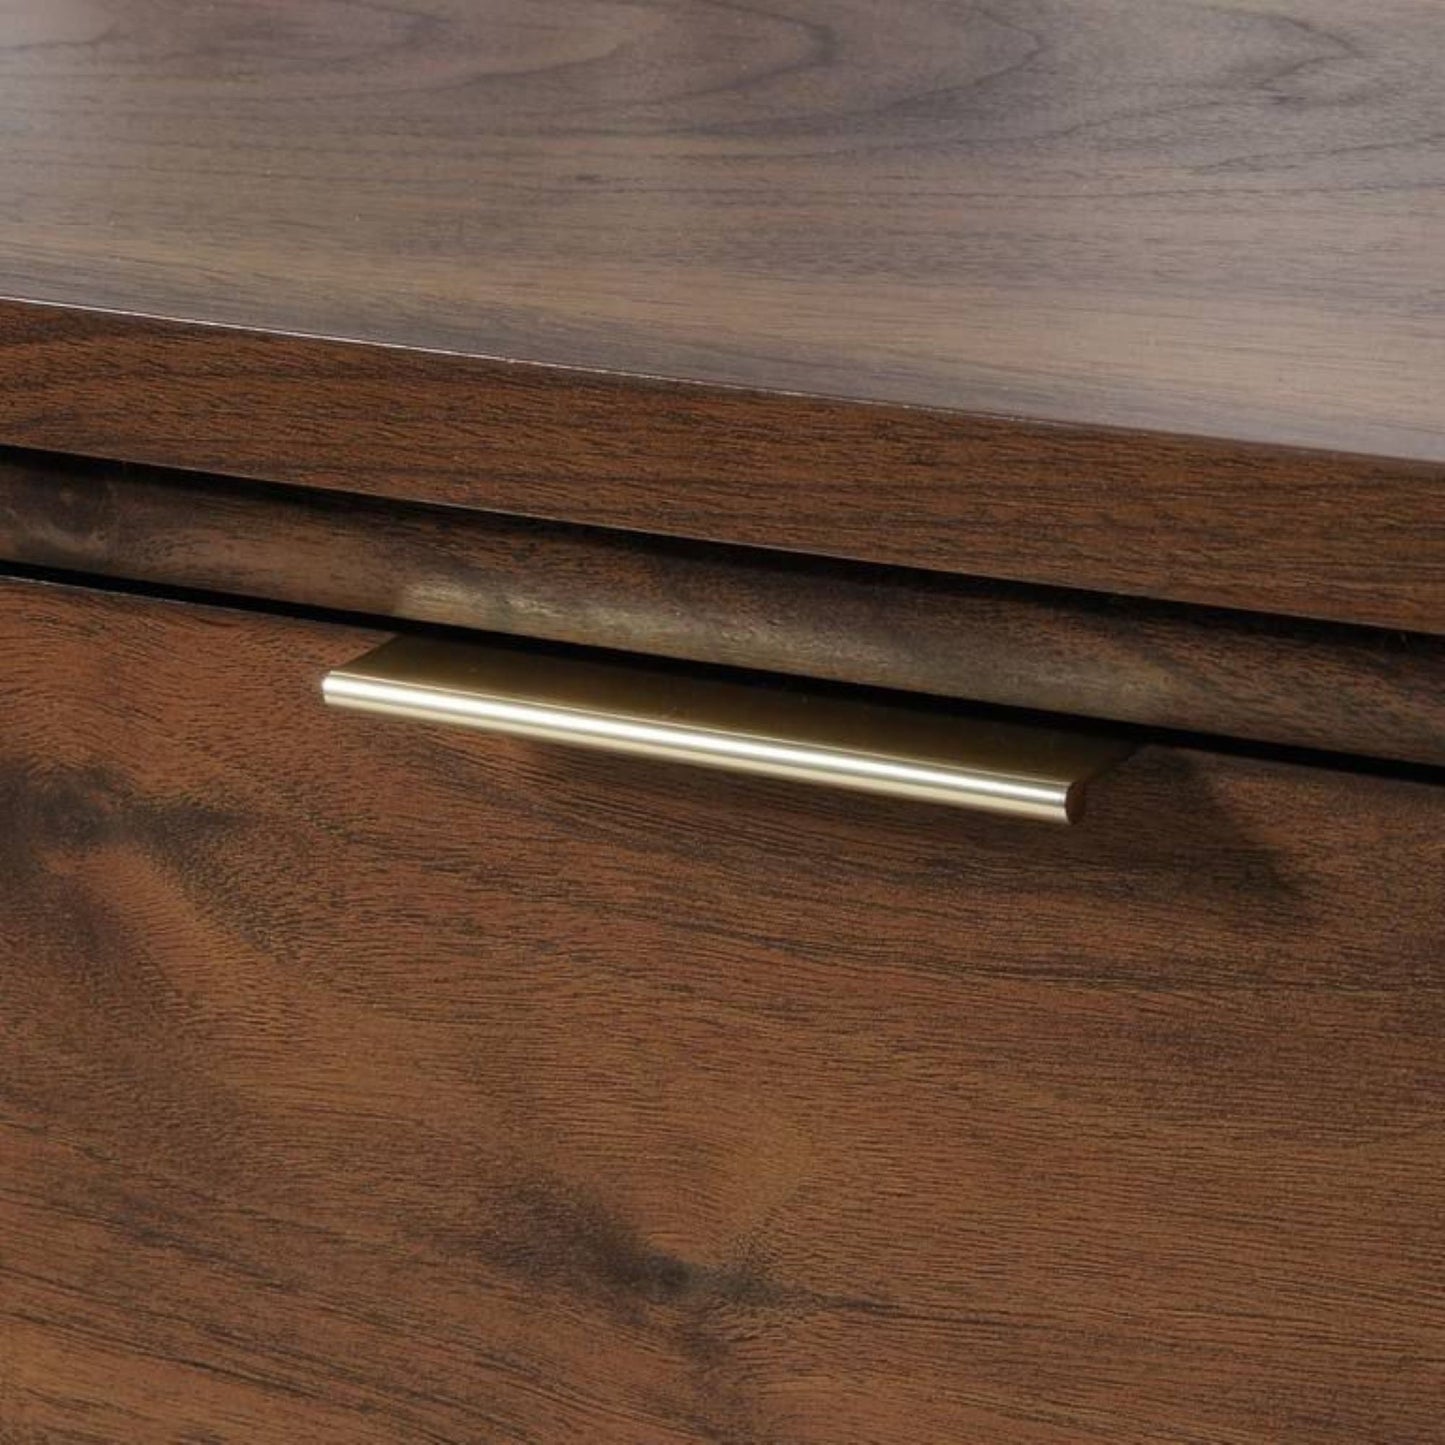 Elegant lateral filer in Walnut finish in Smart Mid Century/ Retro styling with brass handles